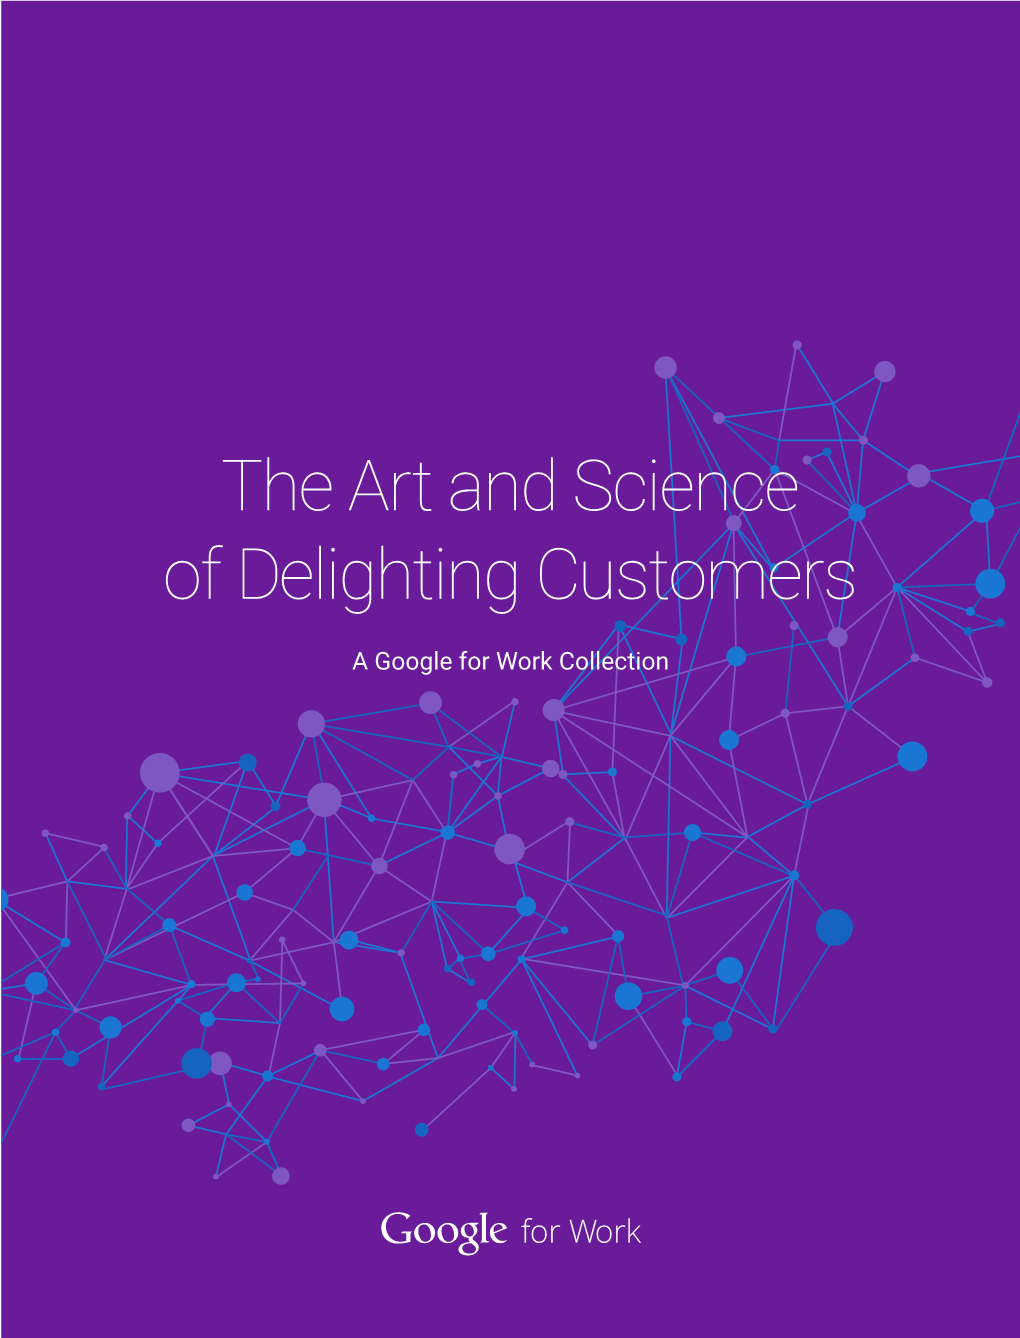 The Art and Science of Delighting Customers